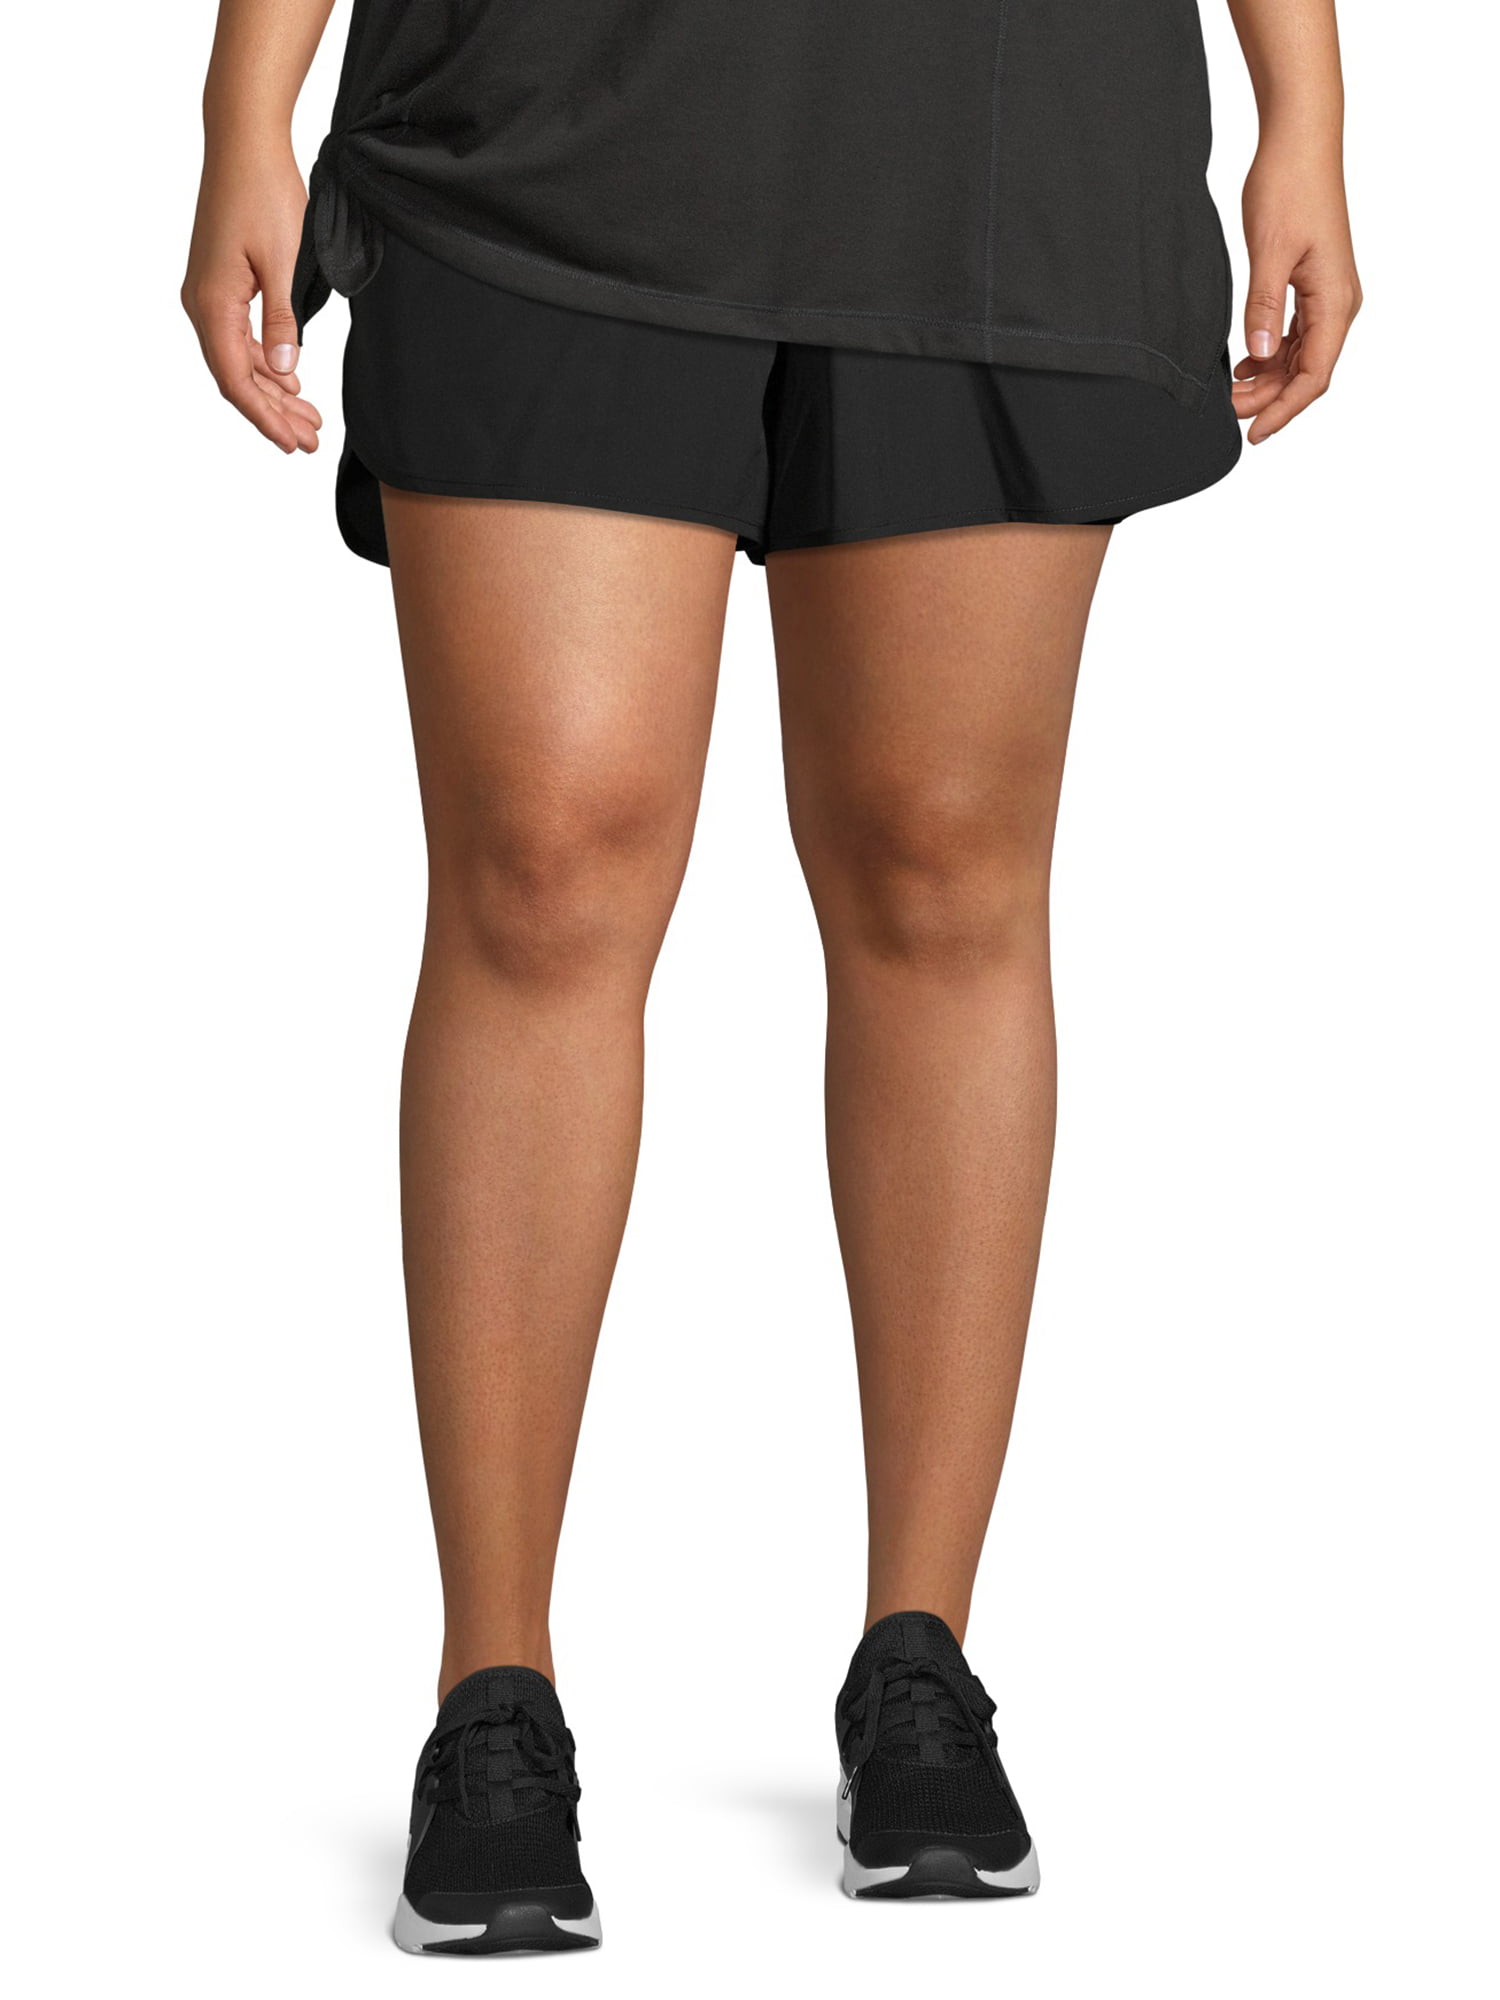 Running Shorts For Plus Size Women